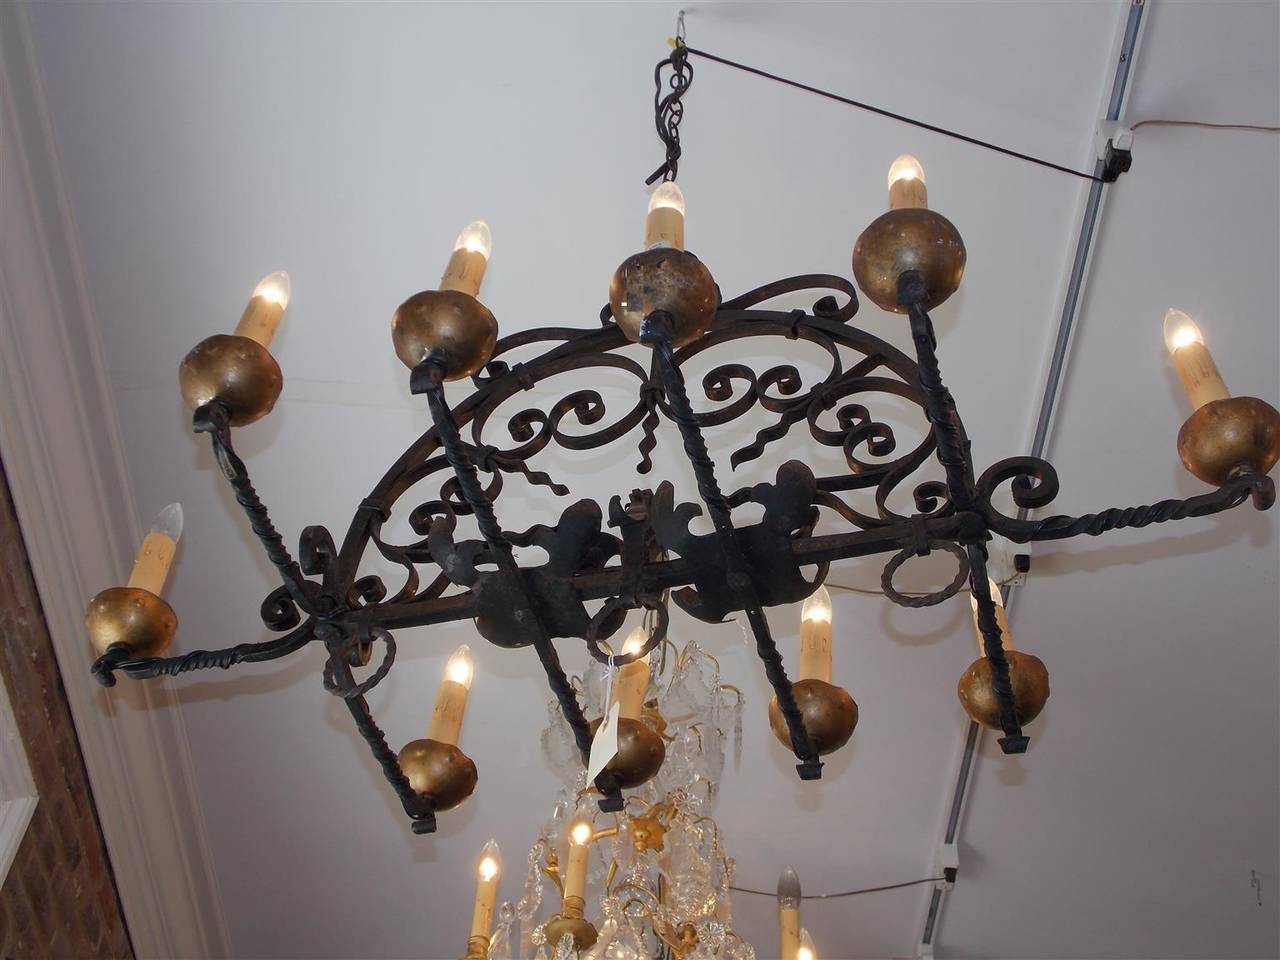 Mid-19th Century French Wrought Iron and Gilt Elongated Chandelier, Circa 1850